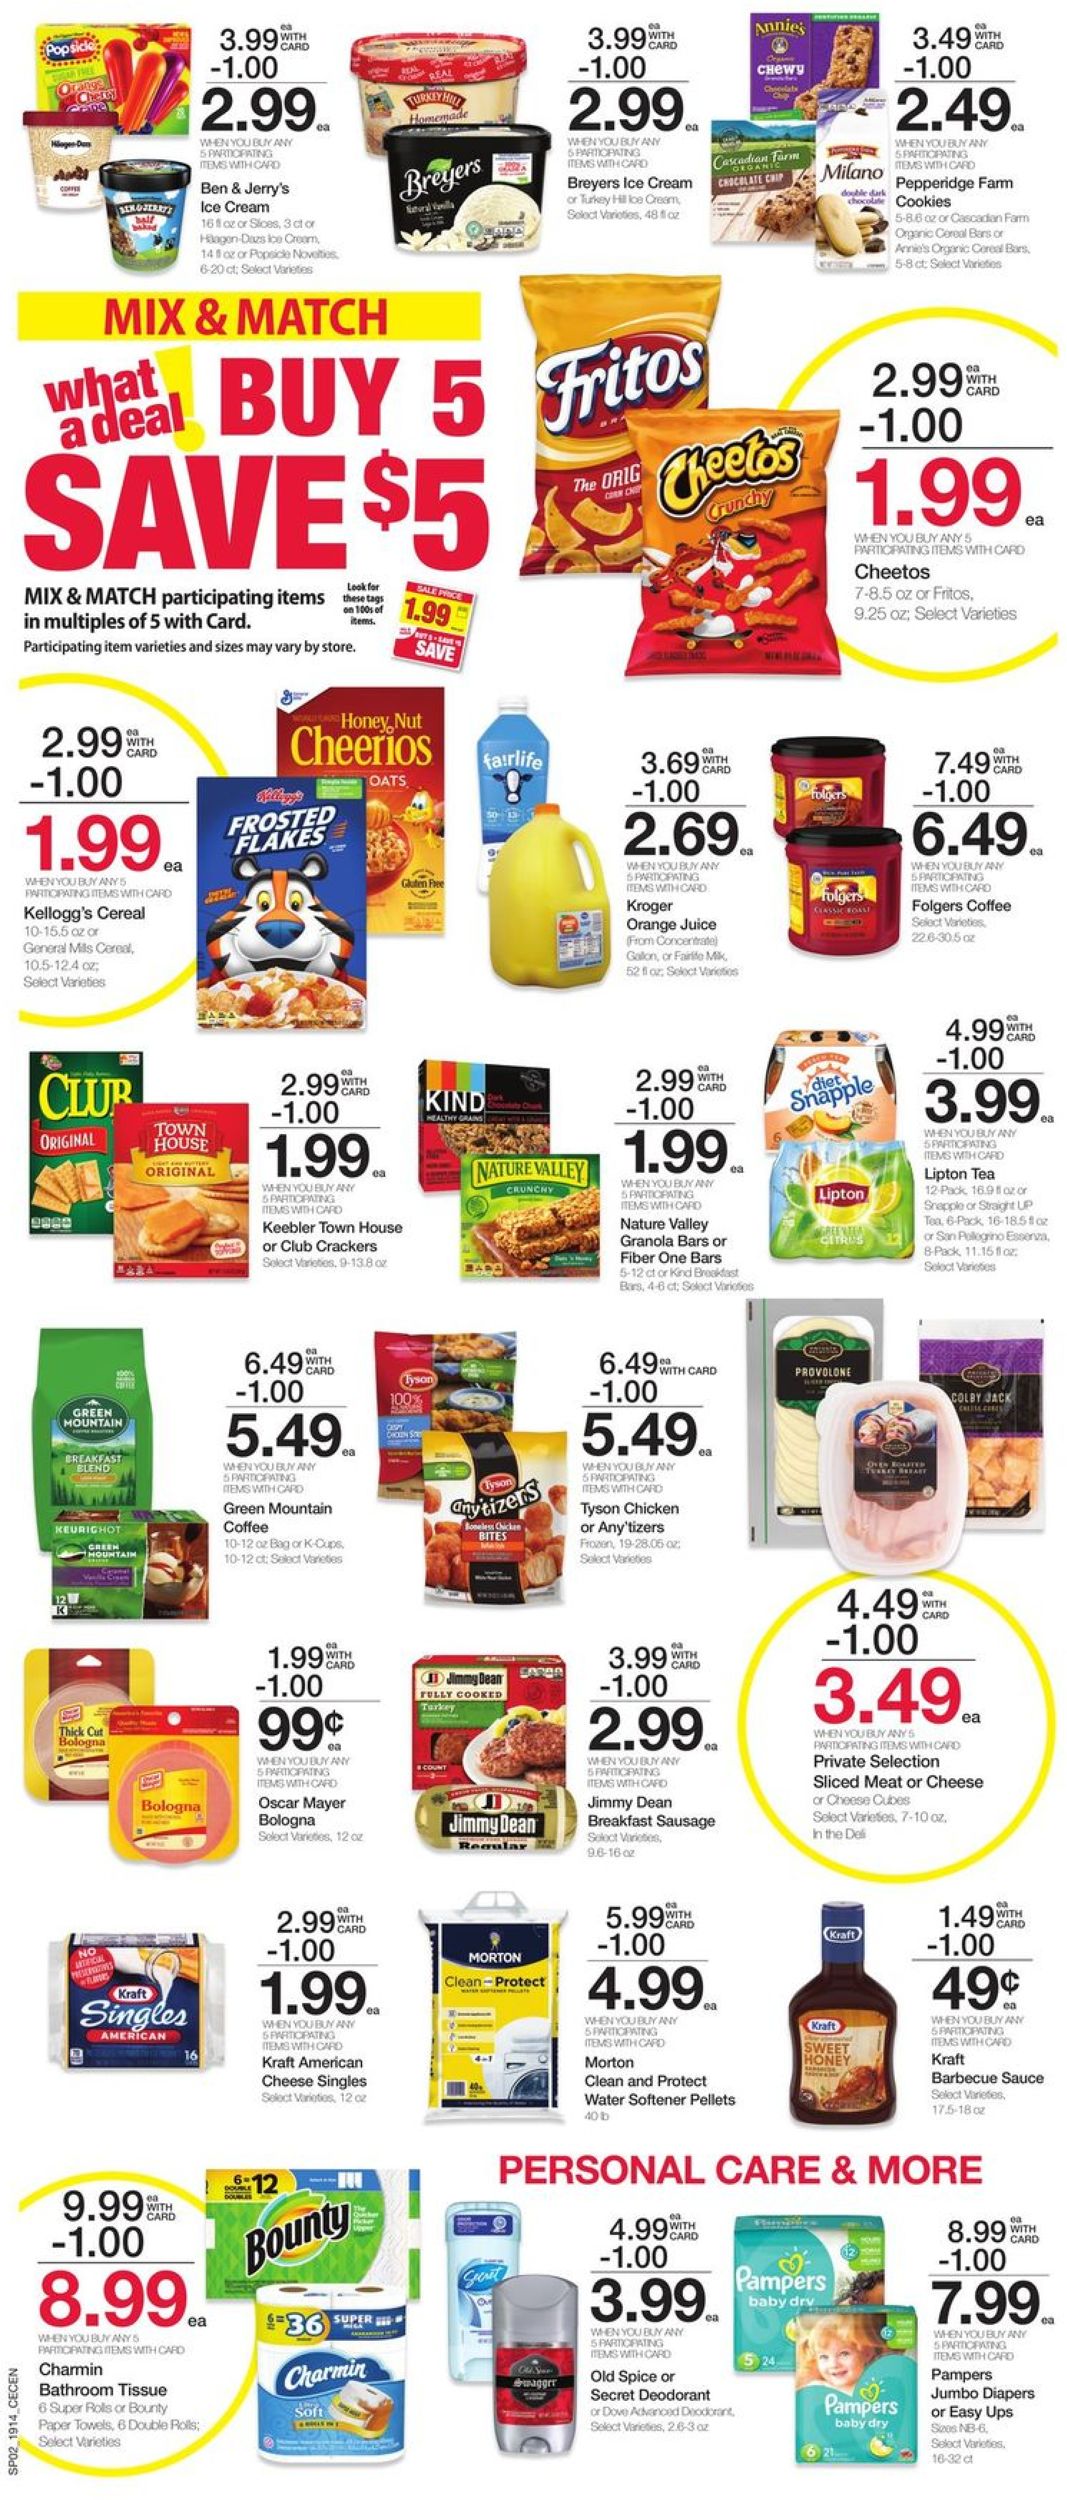 Kroger Current weekly ad 05/08 05/14/2019 [3] frequent